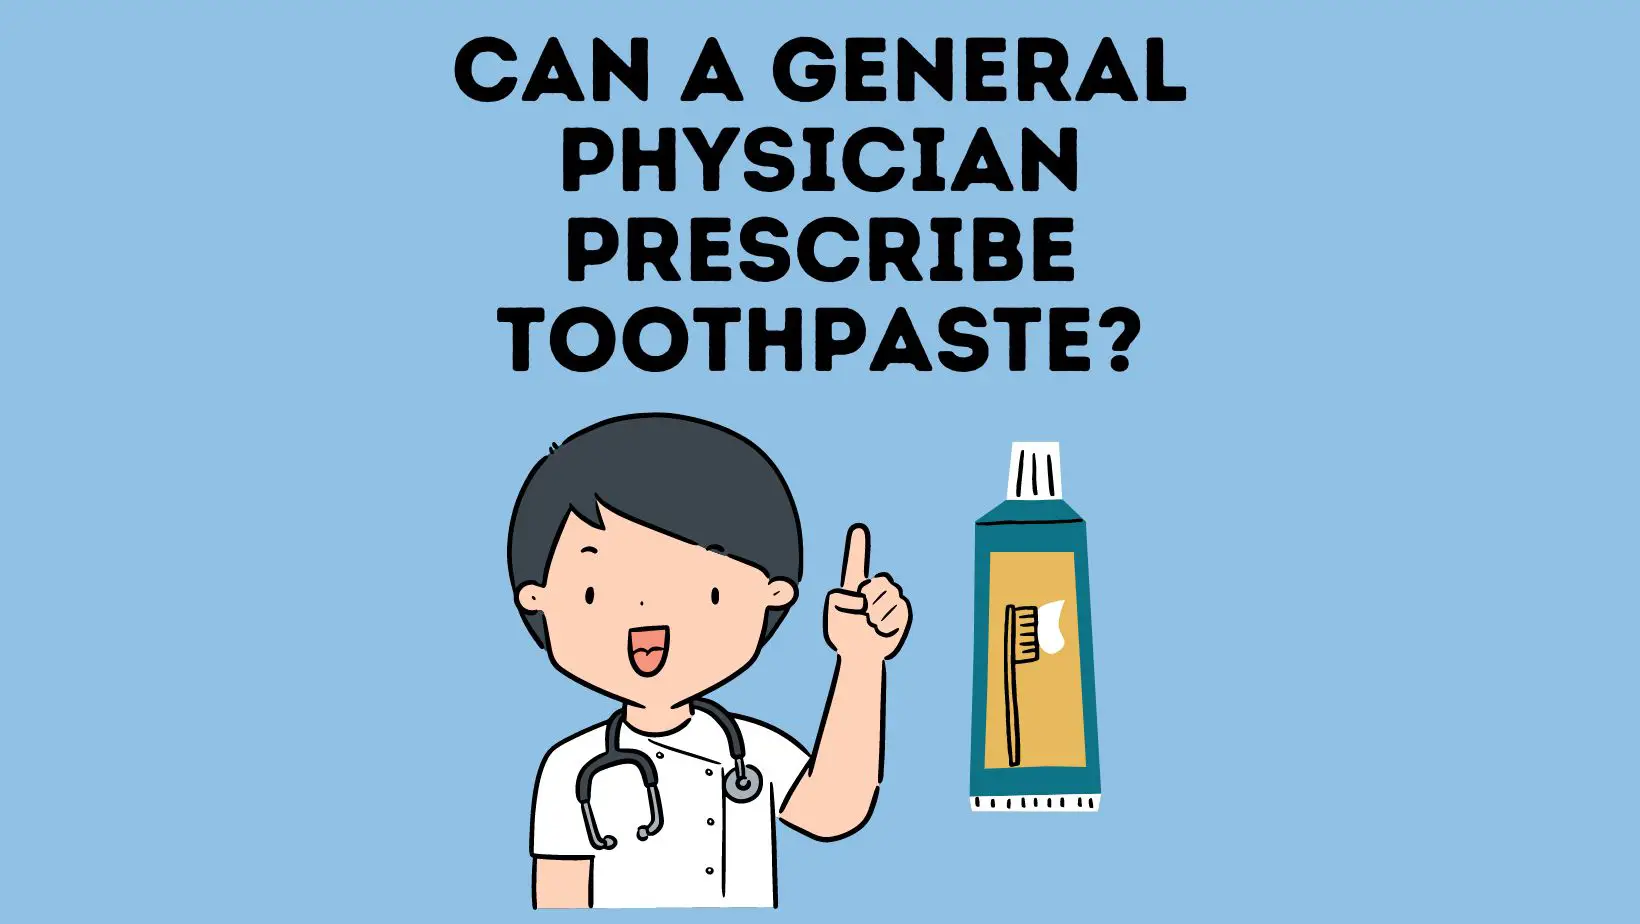 Can A GP General Physician Prescribe Toothpaste